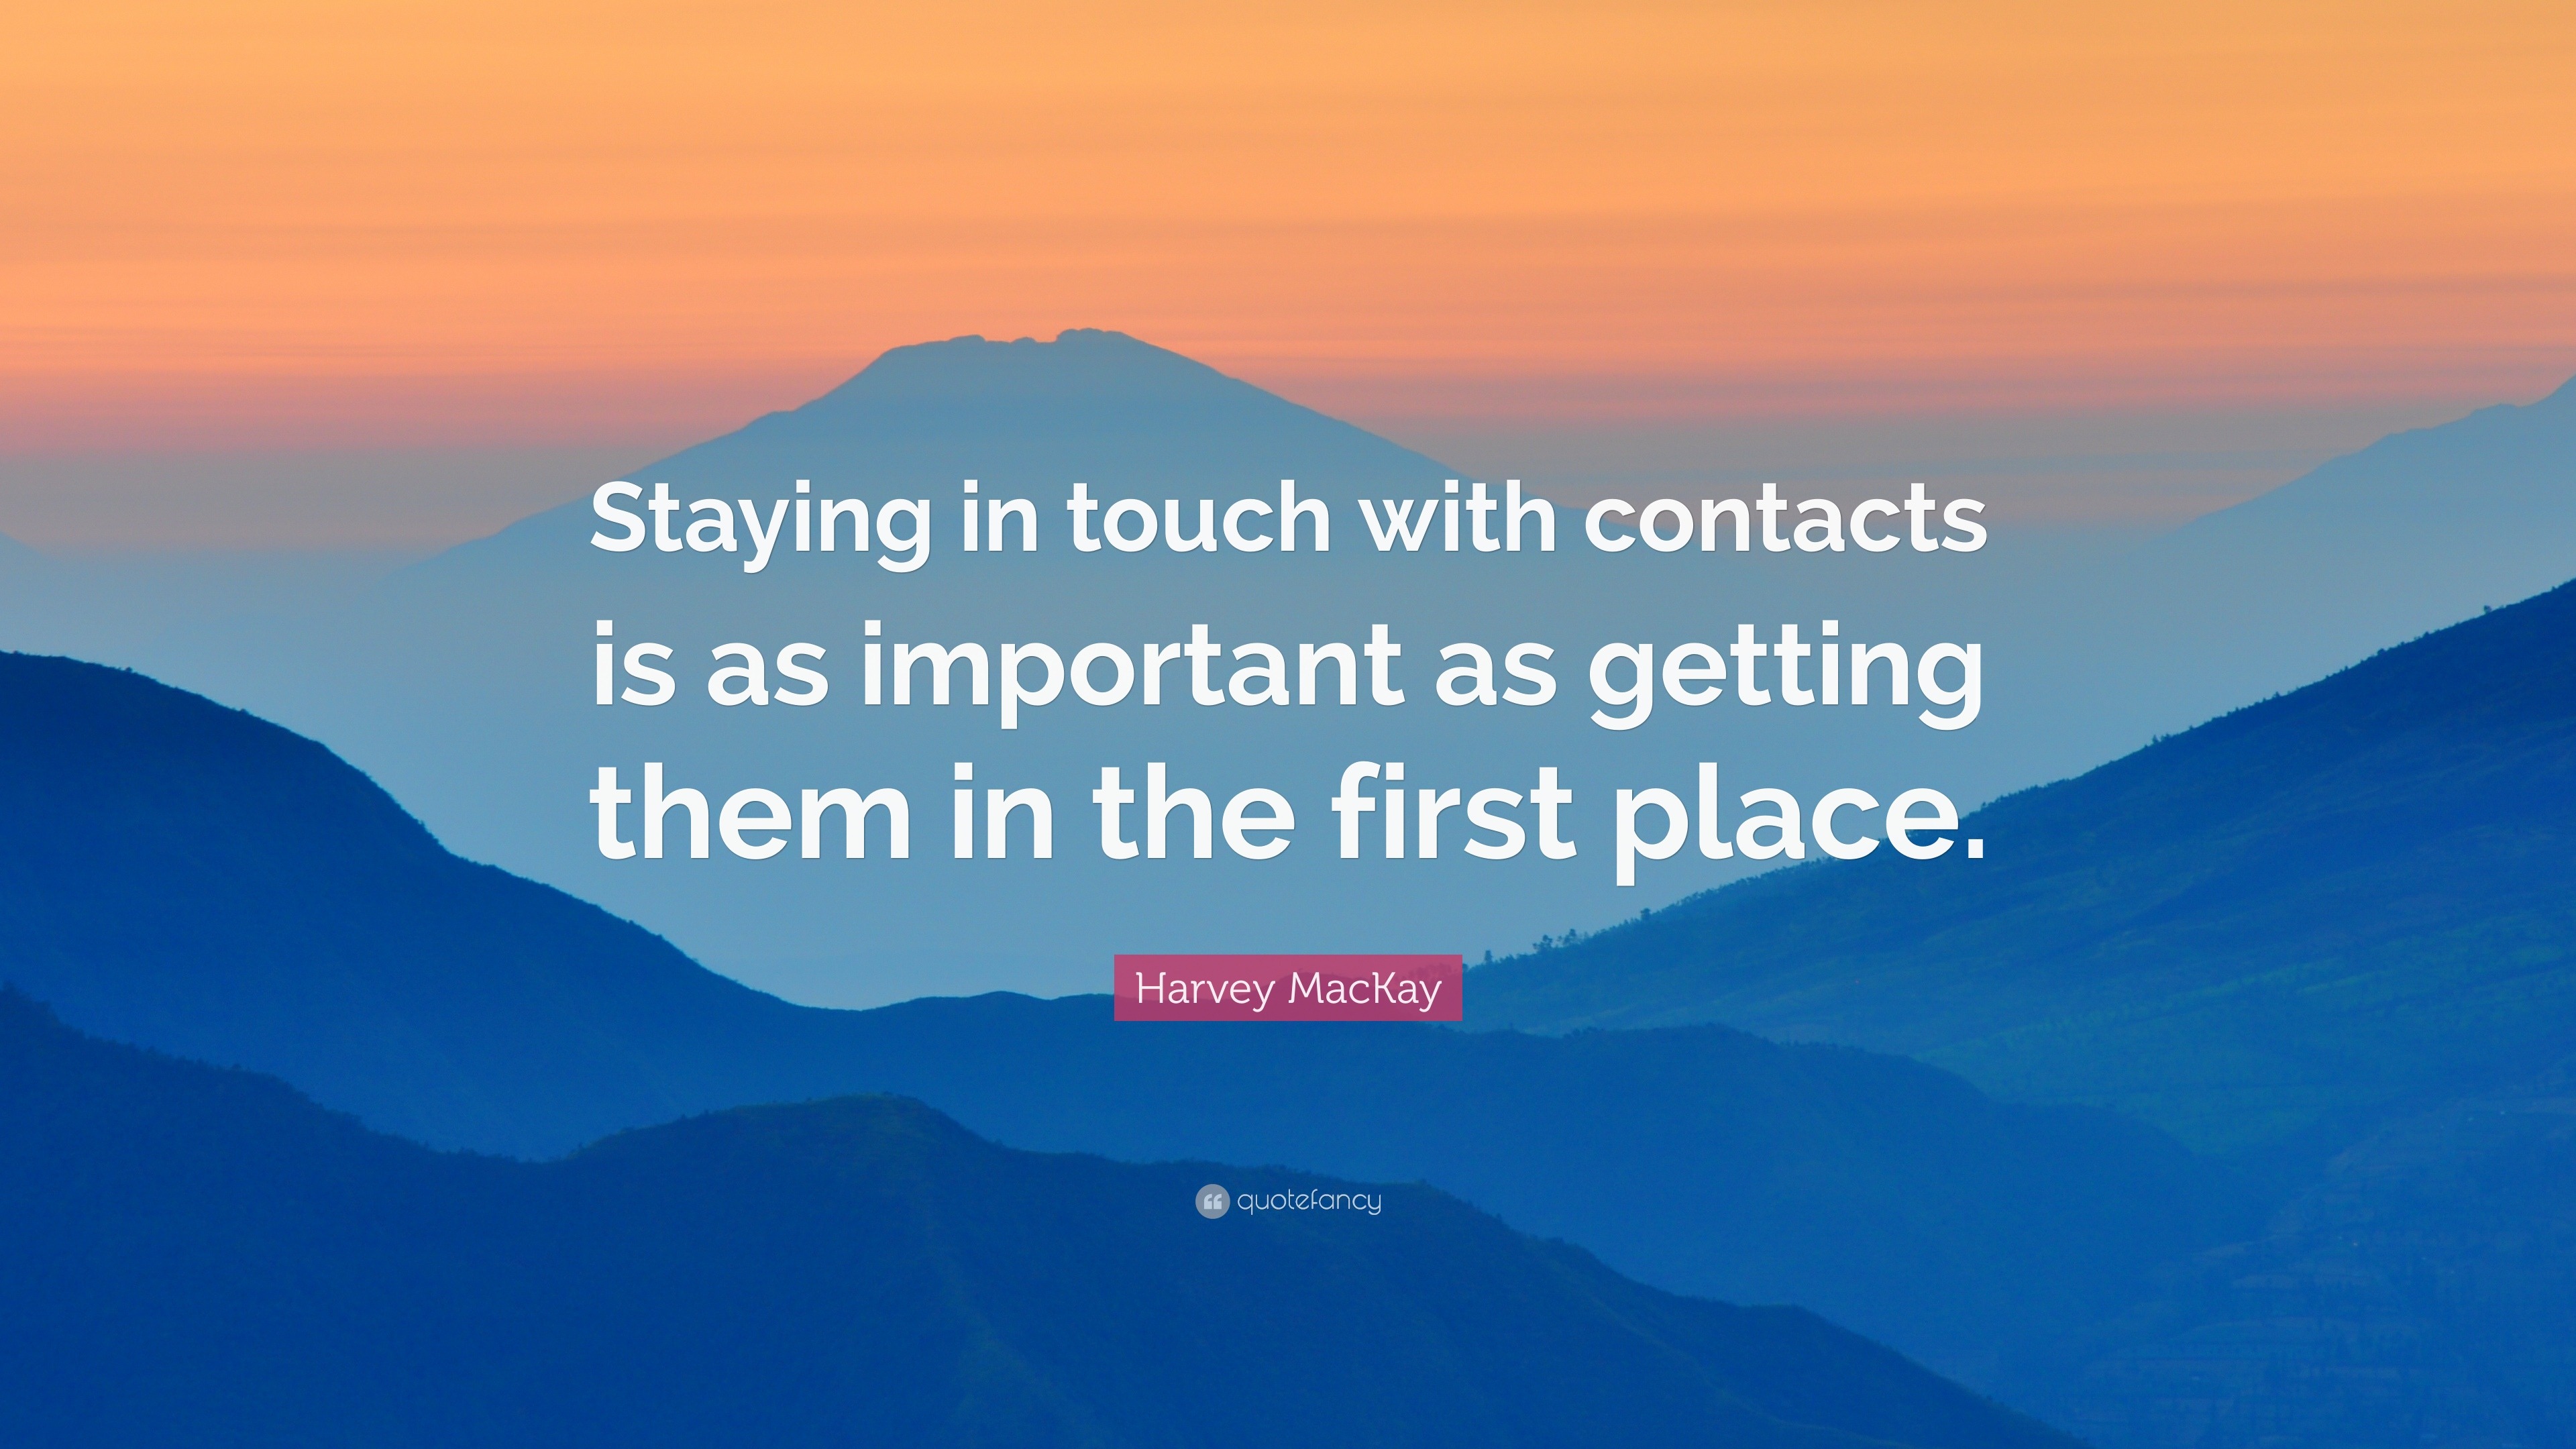 Harvey MacKay Quote: “Staying in touch with contacts is as important as